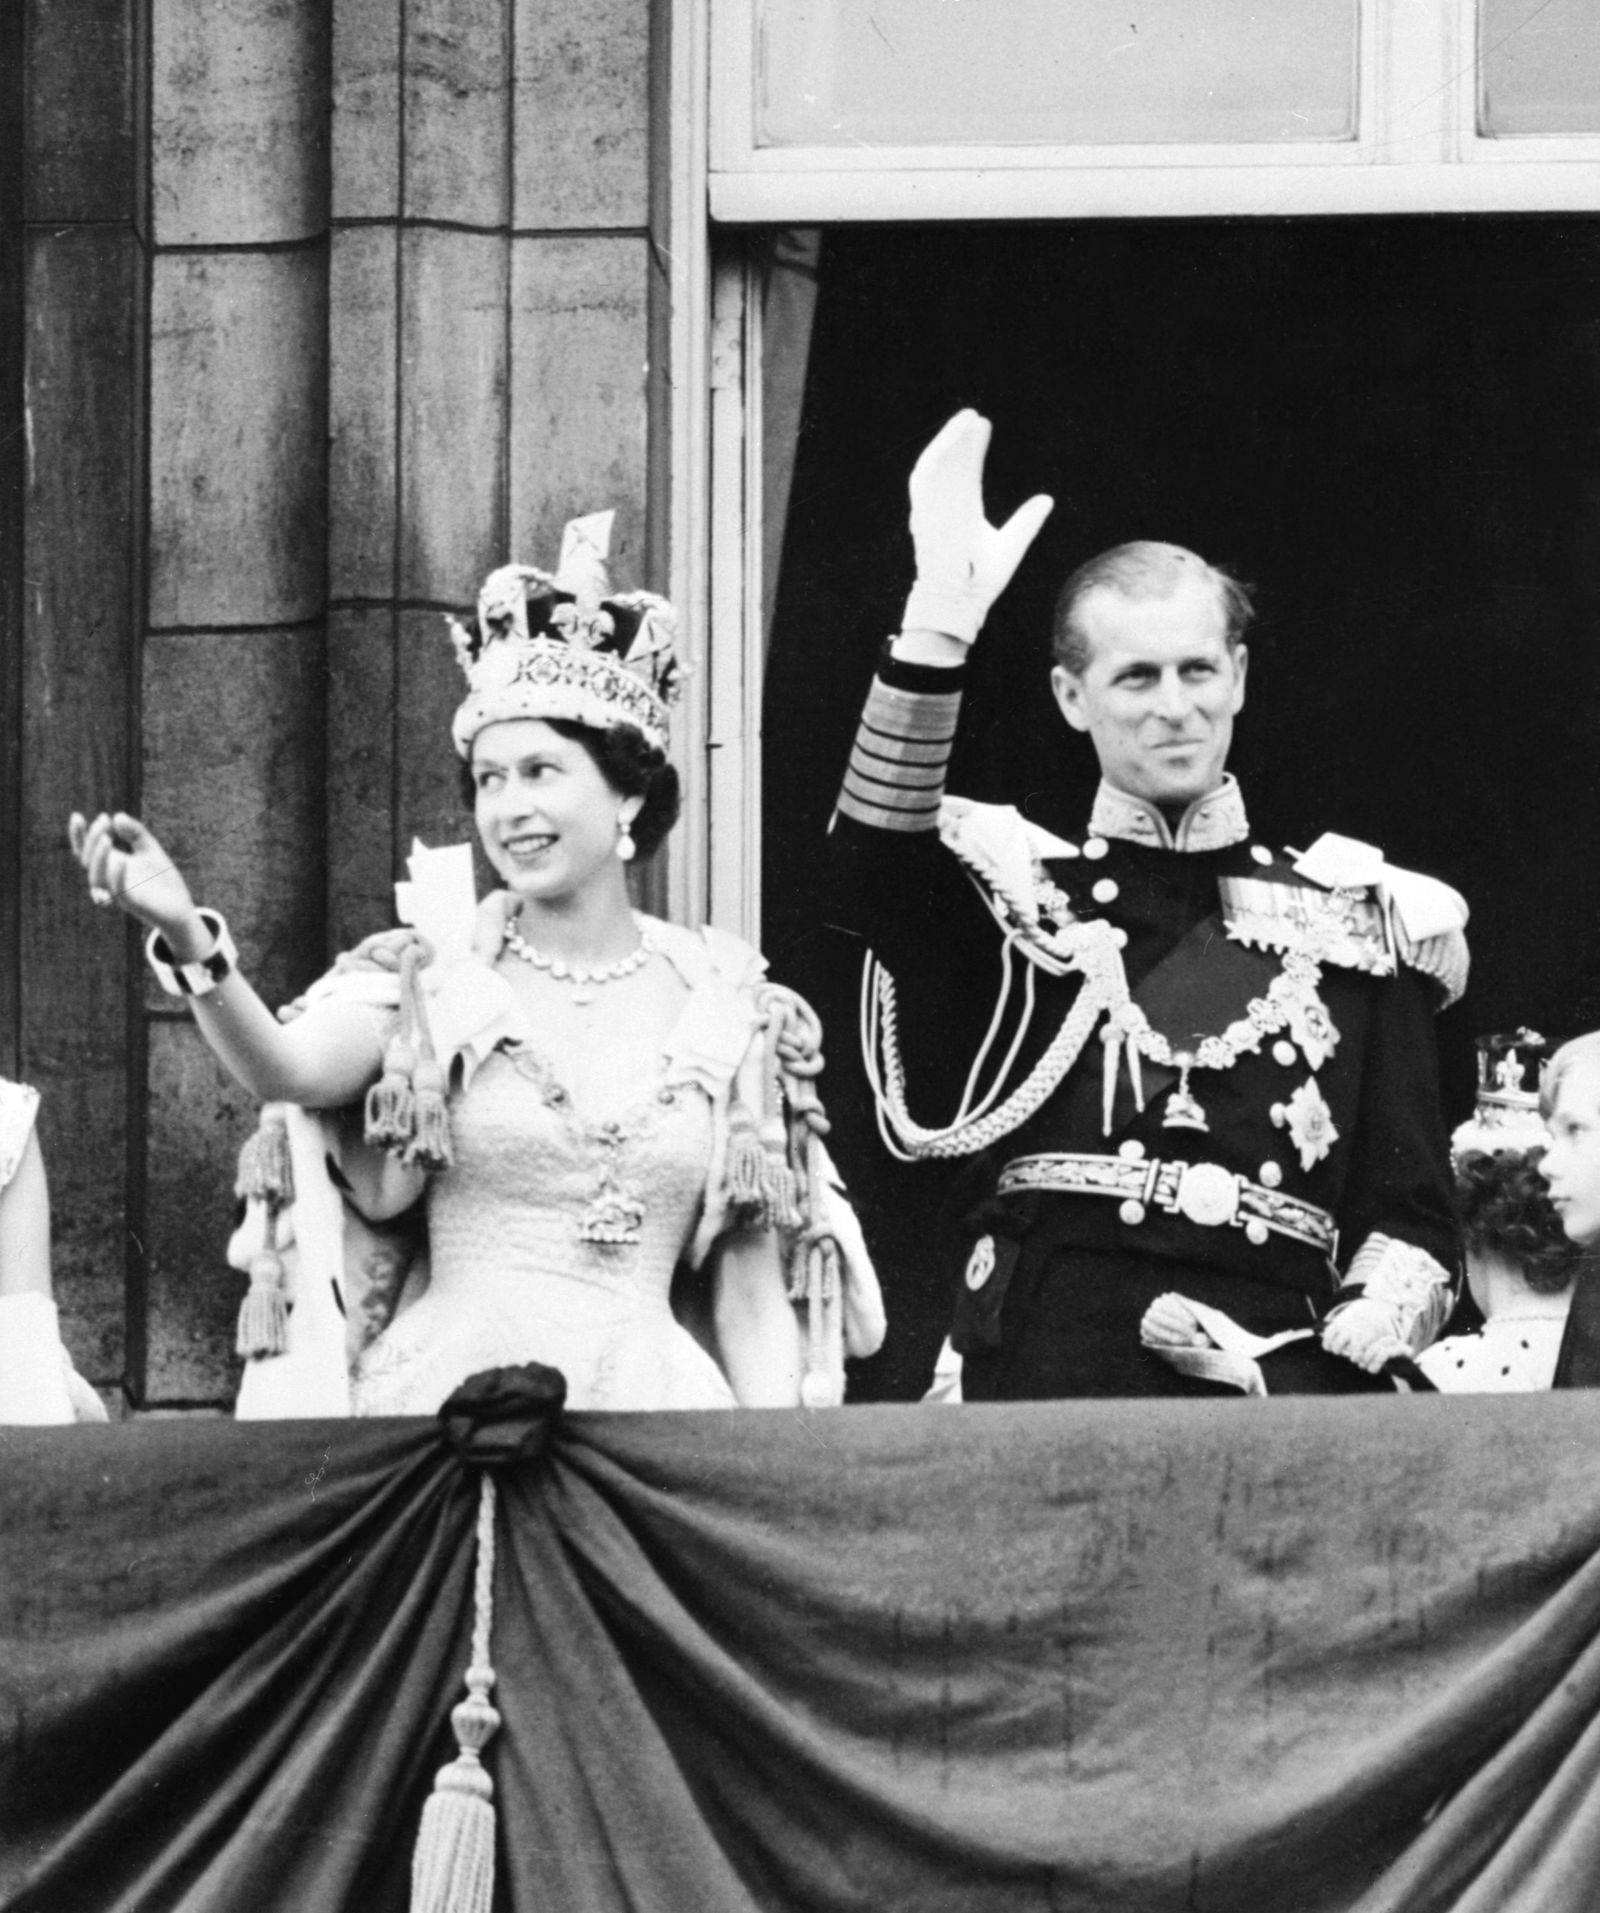 (FILES) In this file photo taken on June 2, 1953 Britain's Queen Elizabeth II (L) accompanied by Britain's Prince Philip, Duke of Edinburgh (R) waves to the crowd, after being crowned  at Westminter Abbey in London. - Queen Elizabeth II, the longest-serving monarch in British history and an icon instantly recognisable to billions of people around the world, has died aged 96, Buckingham Palace said on September 8, 2022. Her eldest son, Charles, 73, succeeds as king immediately, according to centuries of protocol, beginning a new, less certain chapter for the royal family after the queen's record-breaking 70-year reign. (Photo by INTERCONTINENTALE / AFP) - AFP